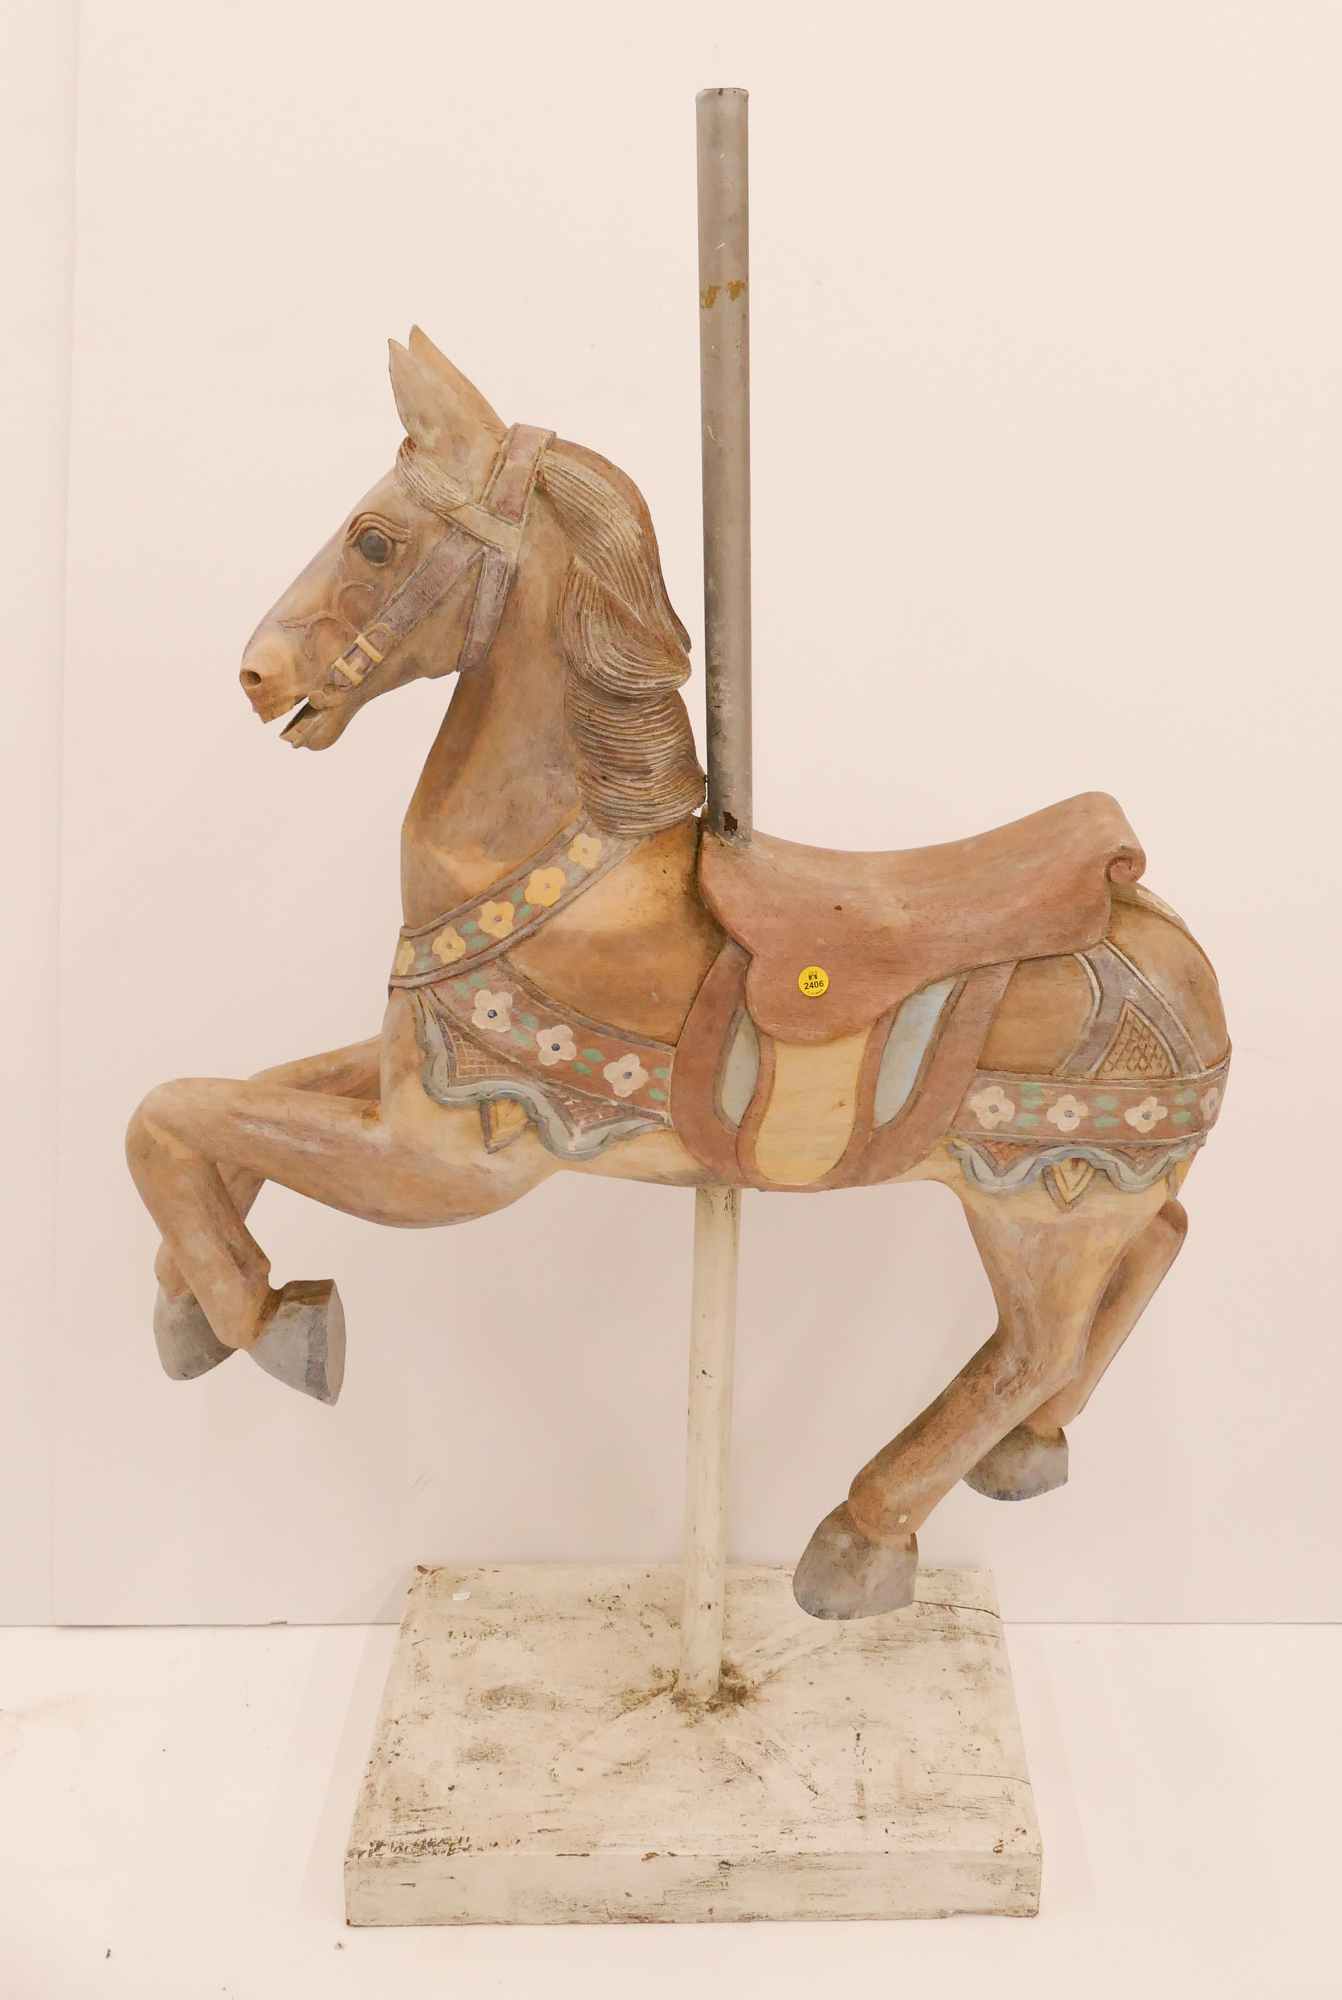 Wood Carousel Horse Model on Stand  3691e8